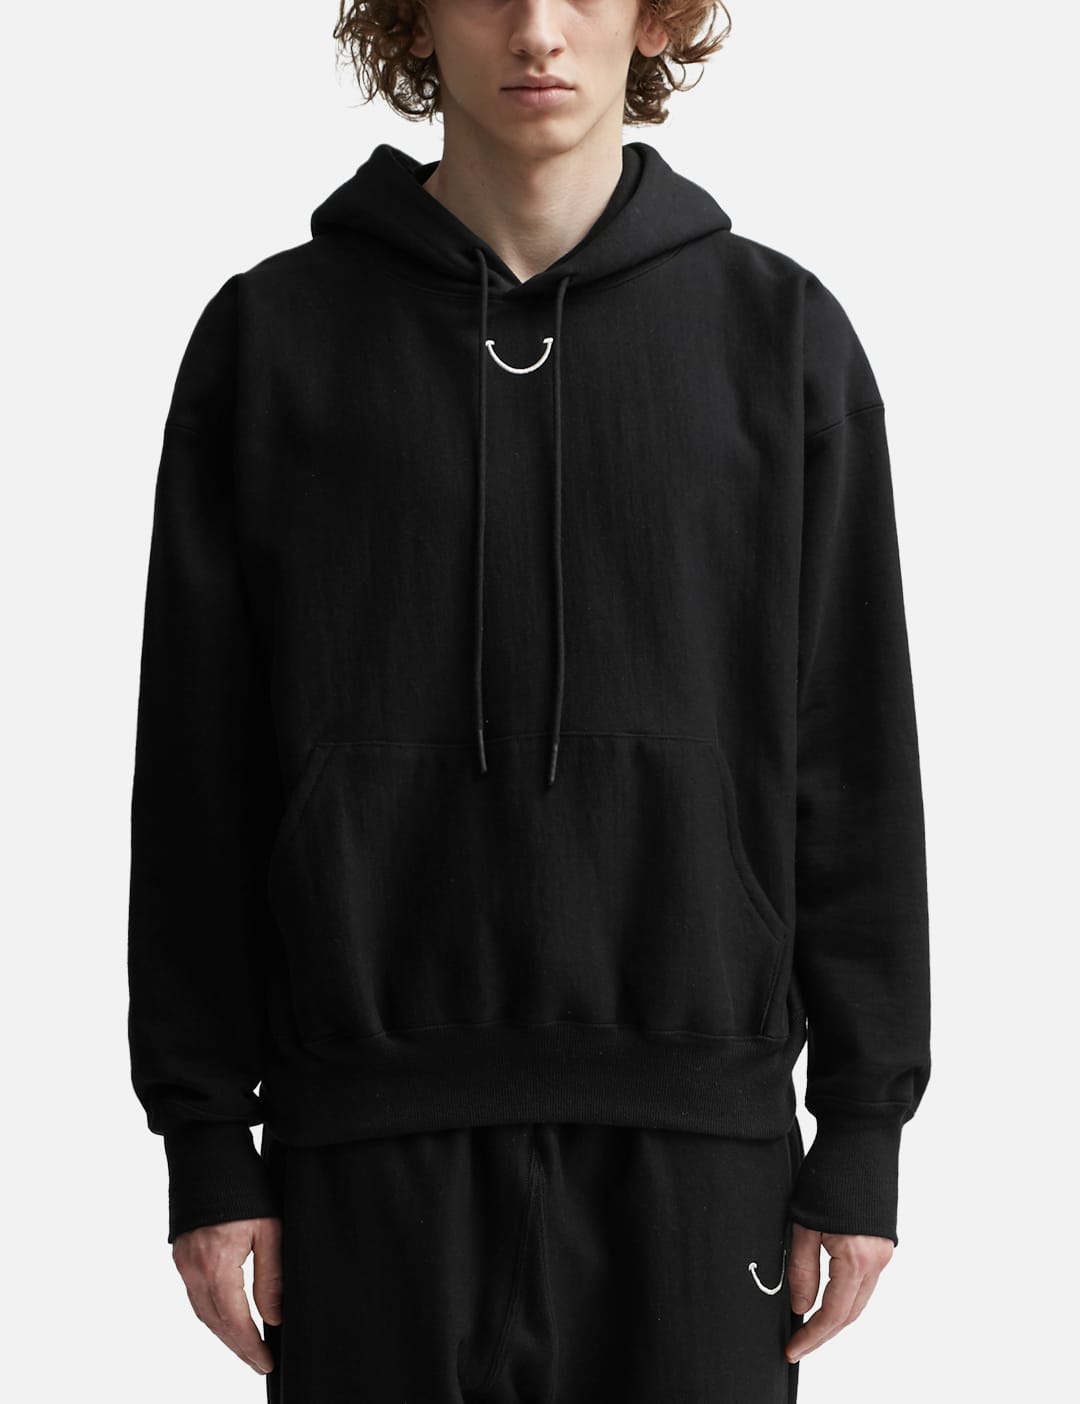 READYMADE - SMILE LOGO HOODIE | HBX - Globally Curated Fashion and